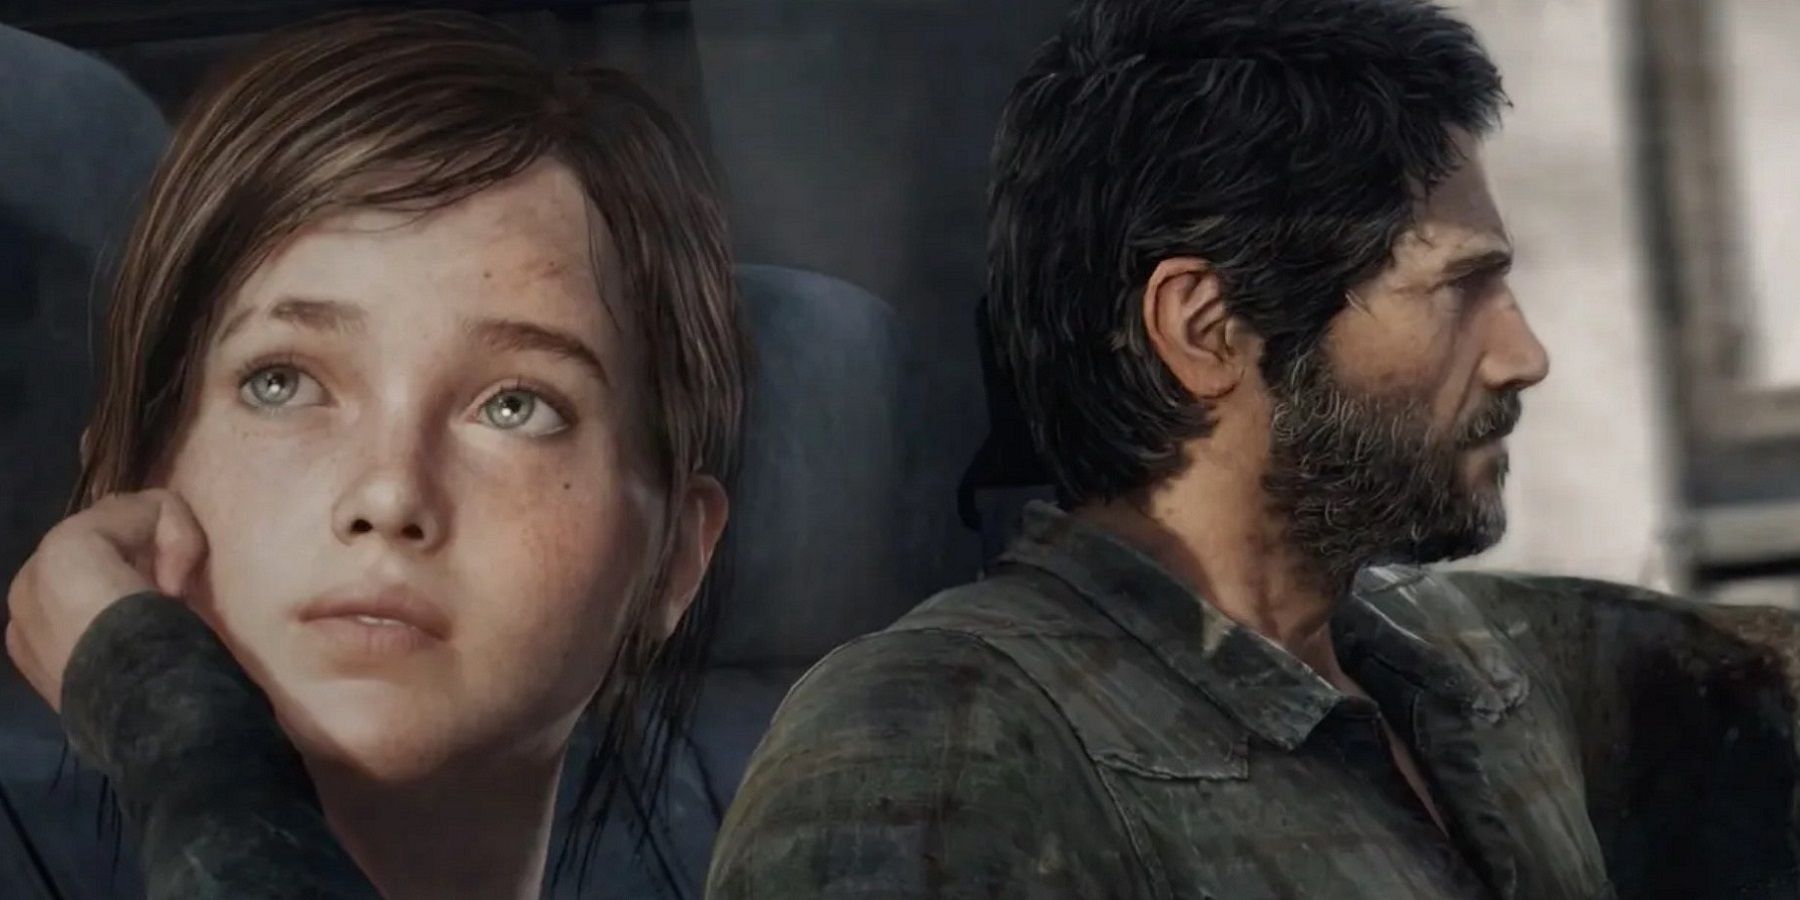 An image from The Last of Us showing Joel driving while Ellie looks out the window.